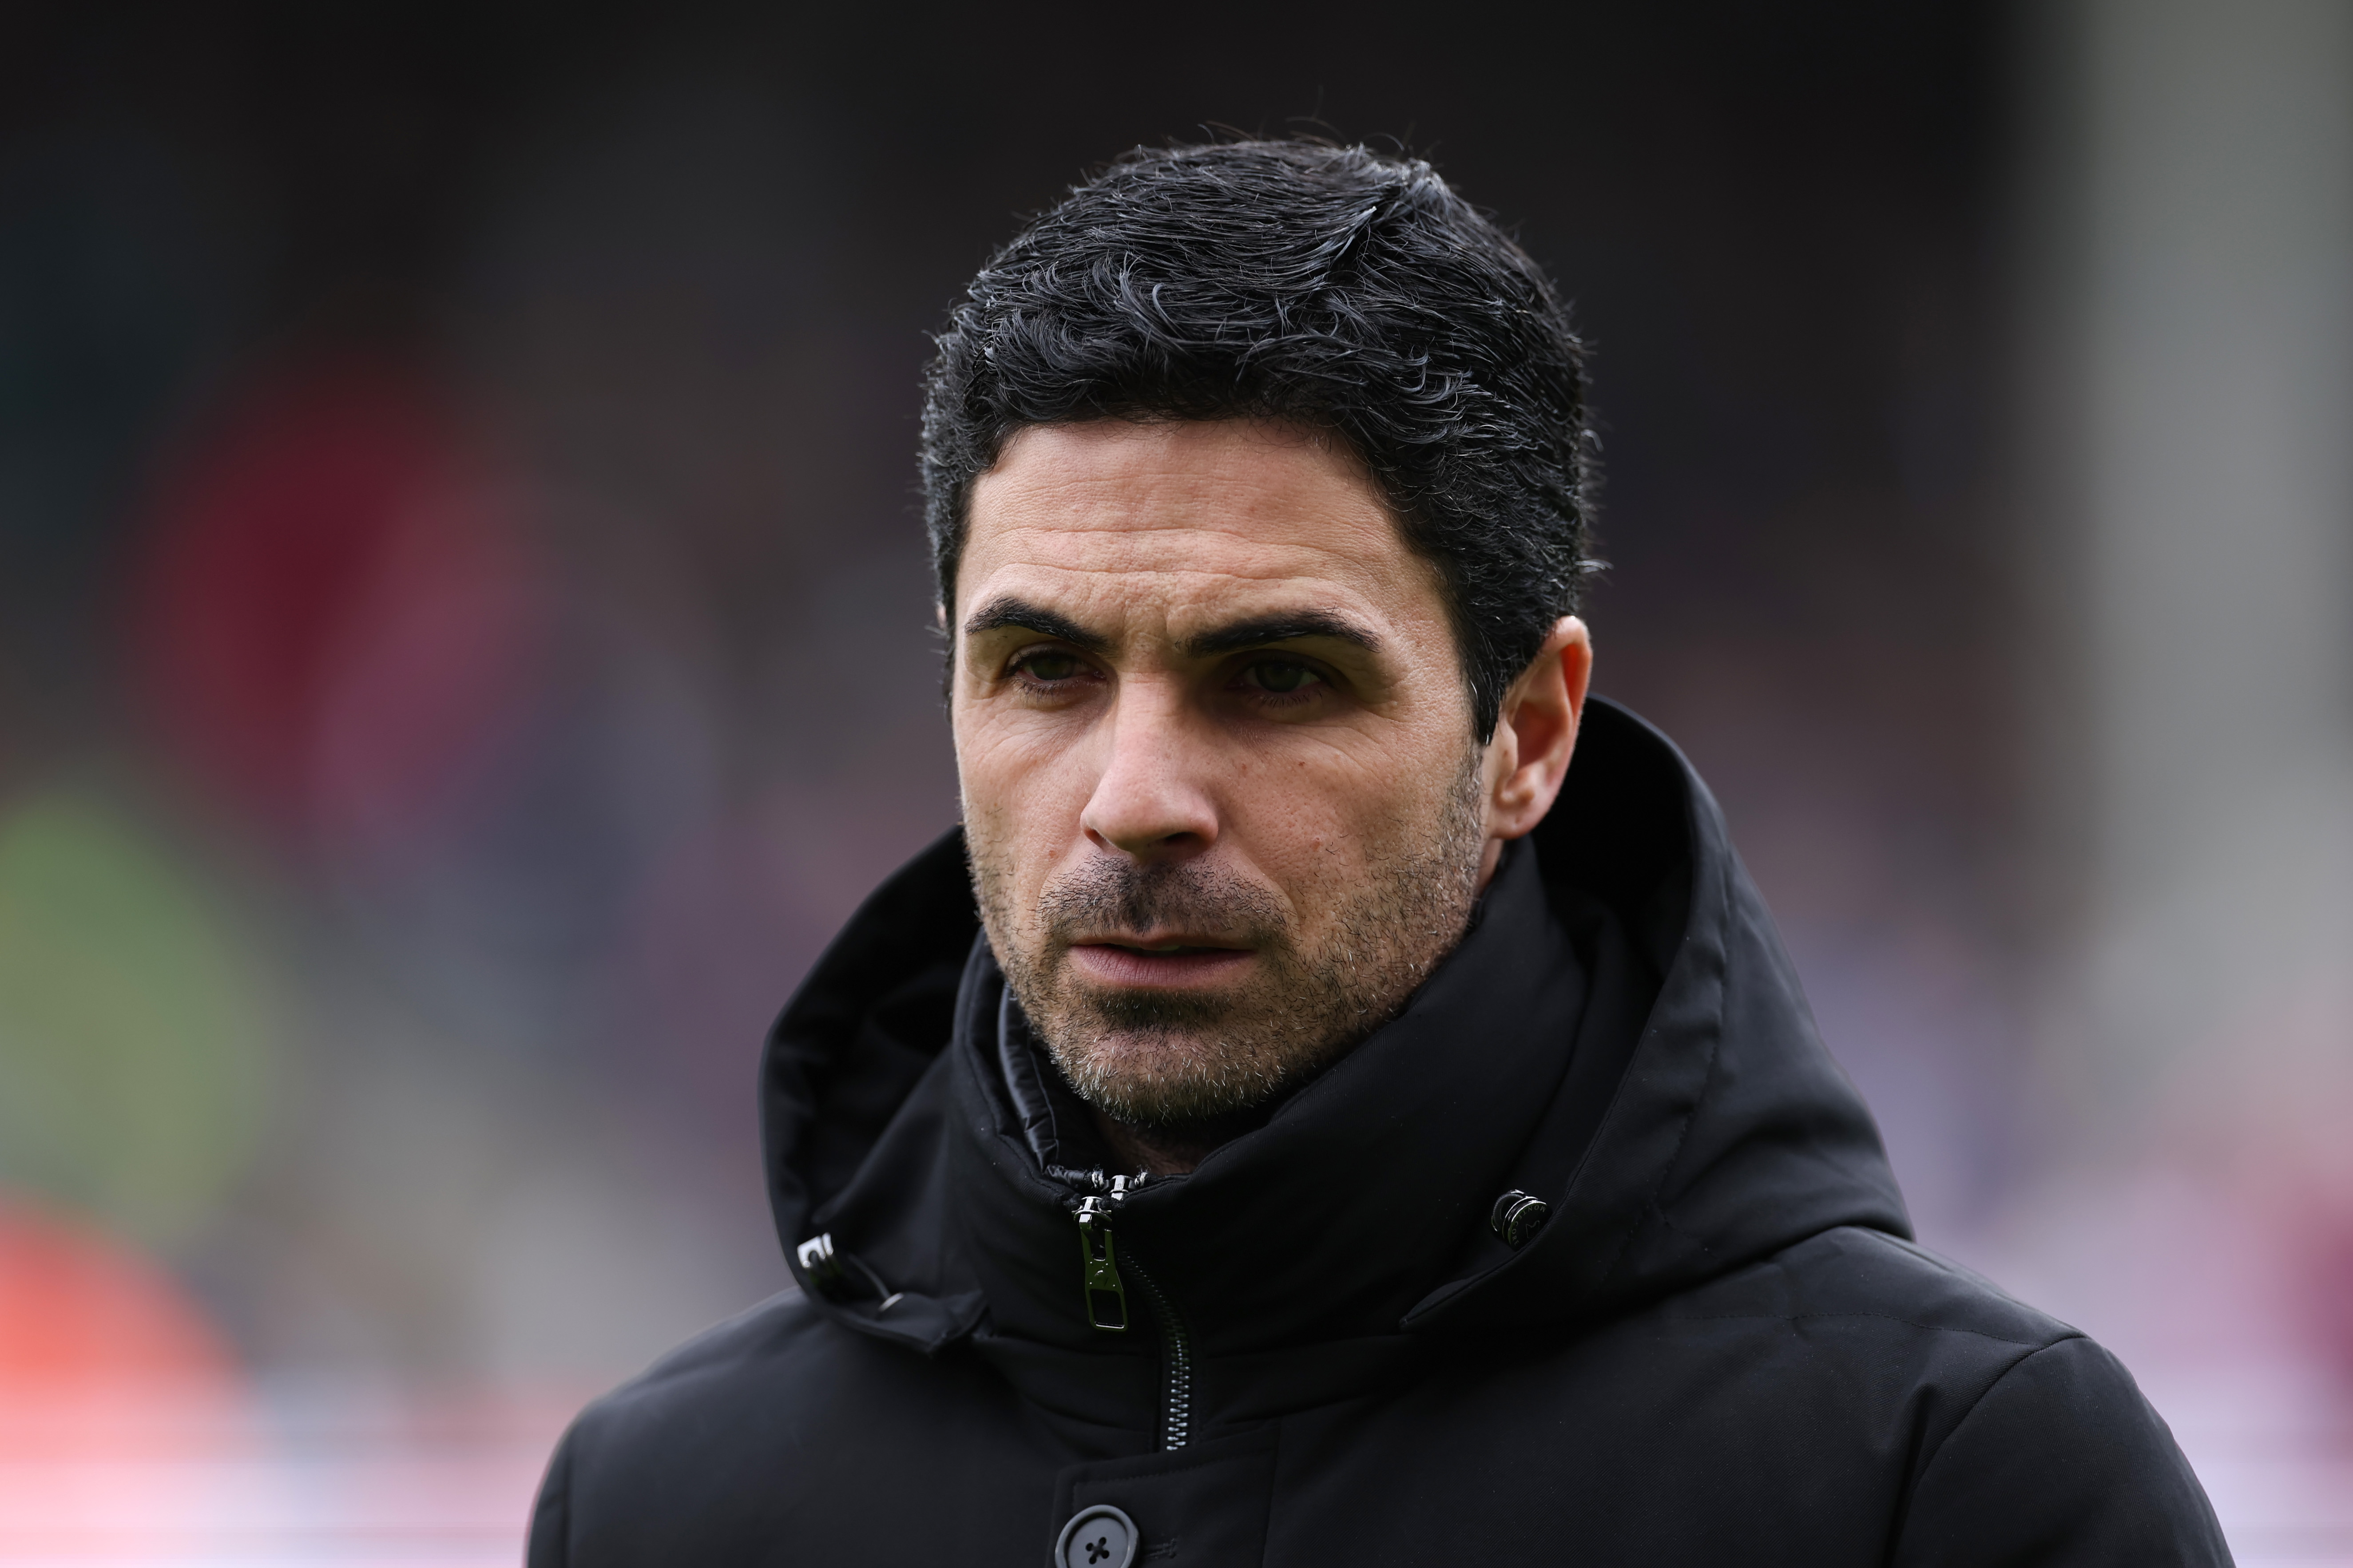 Arsenal boss Mikel Arteta opens up ahead of the Gunners trip to Everton 